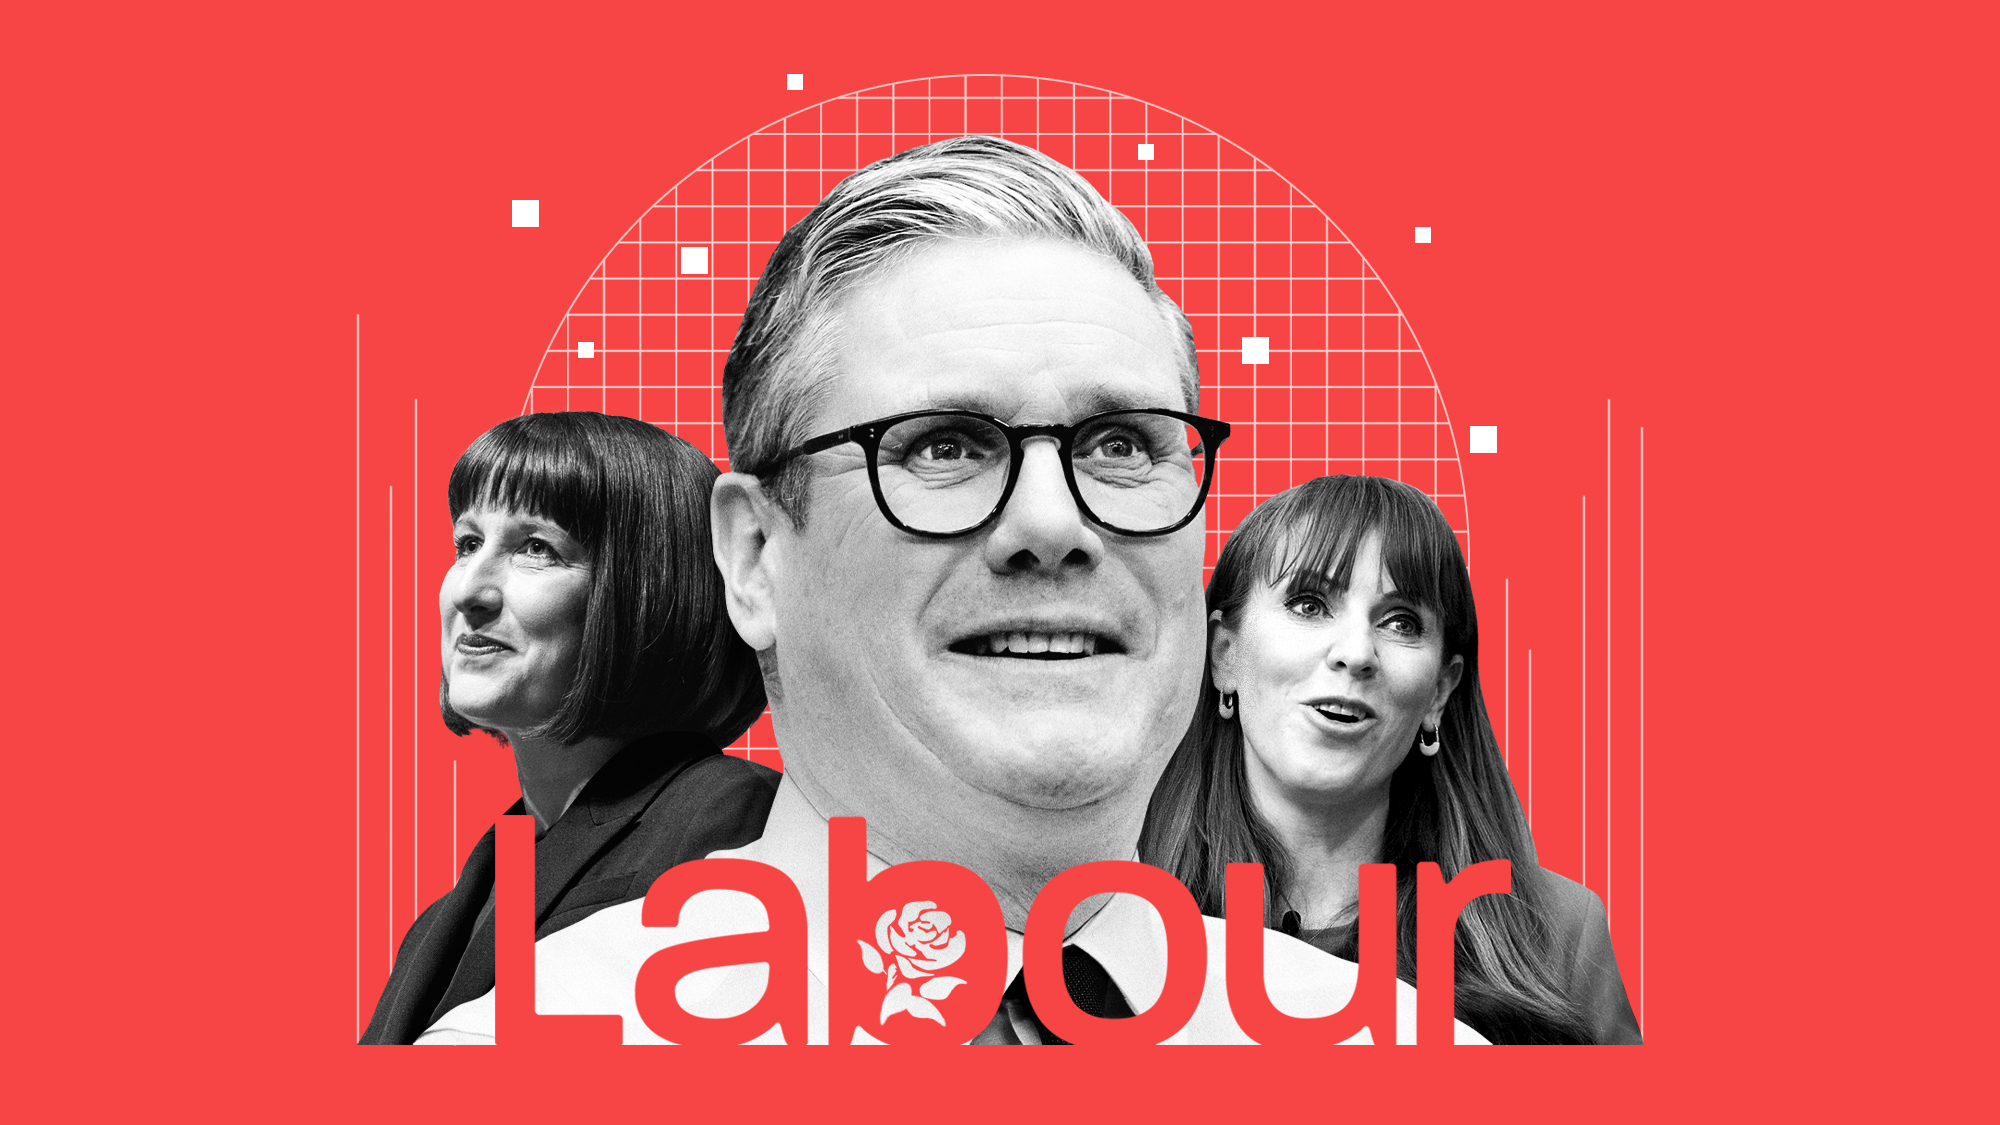  How is Labour going to change the UK? 